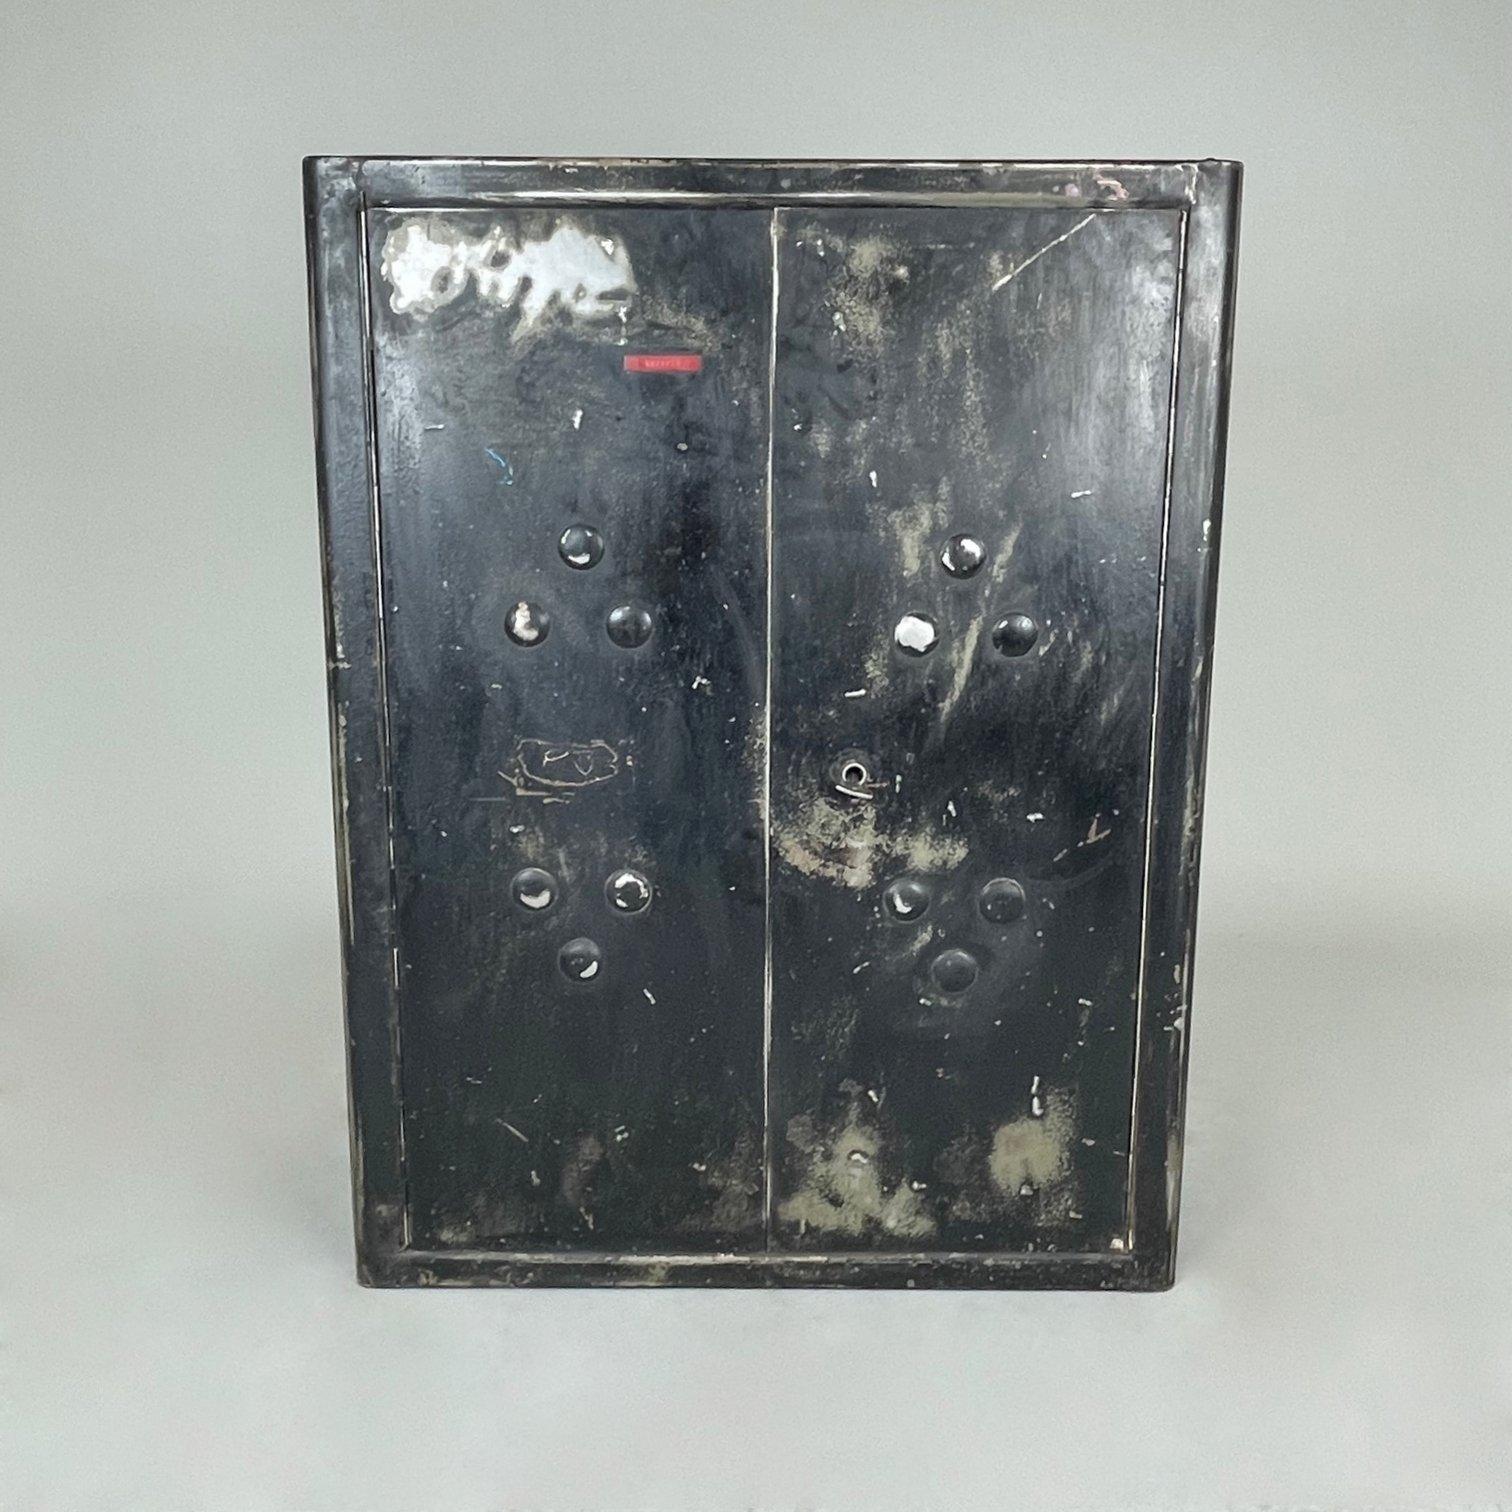 Vintage industrial tool cabinet saved from a tool factory in Poland. All parts are original, including the locking system and key. Can be hung on the wall or placed anywhere. The surface is completely cleaned and brushed.